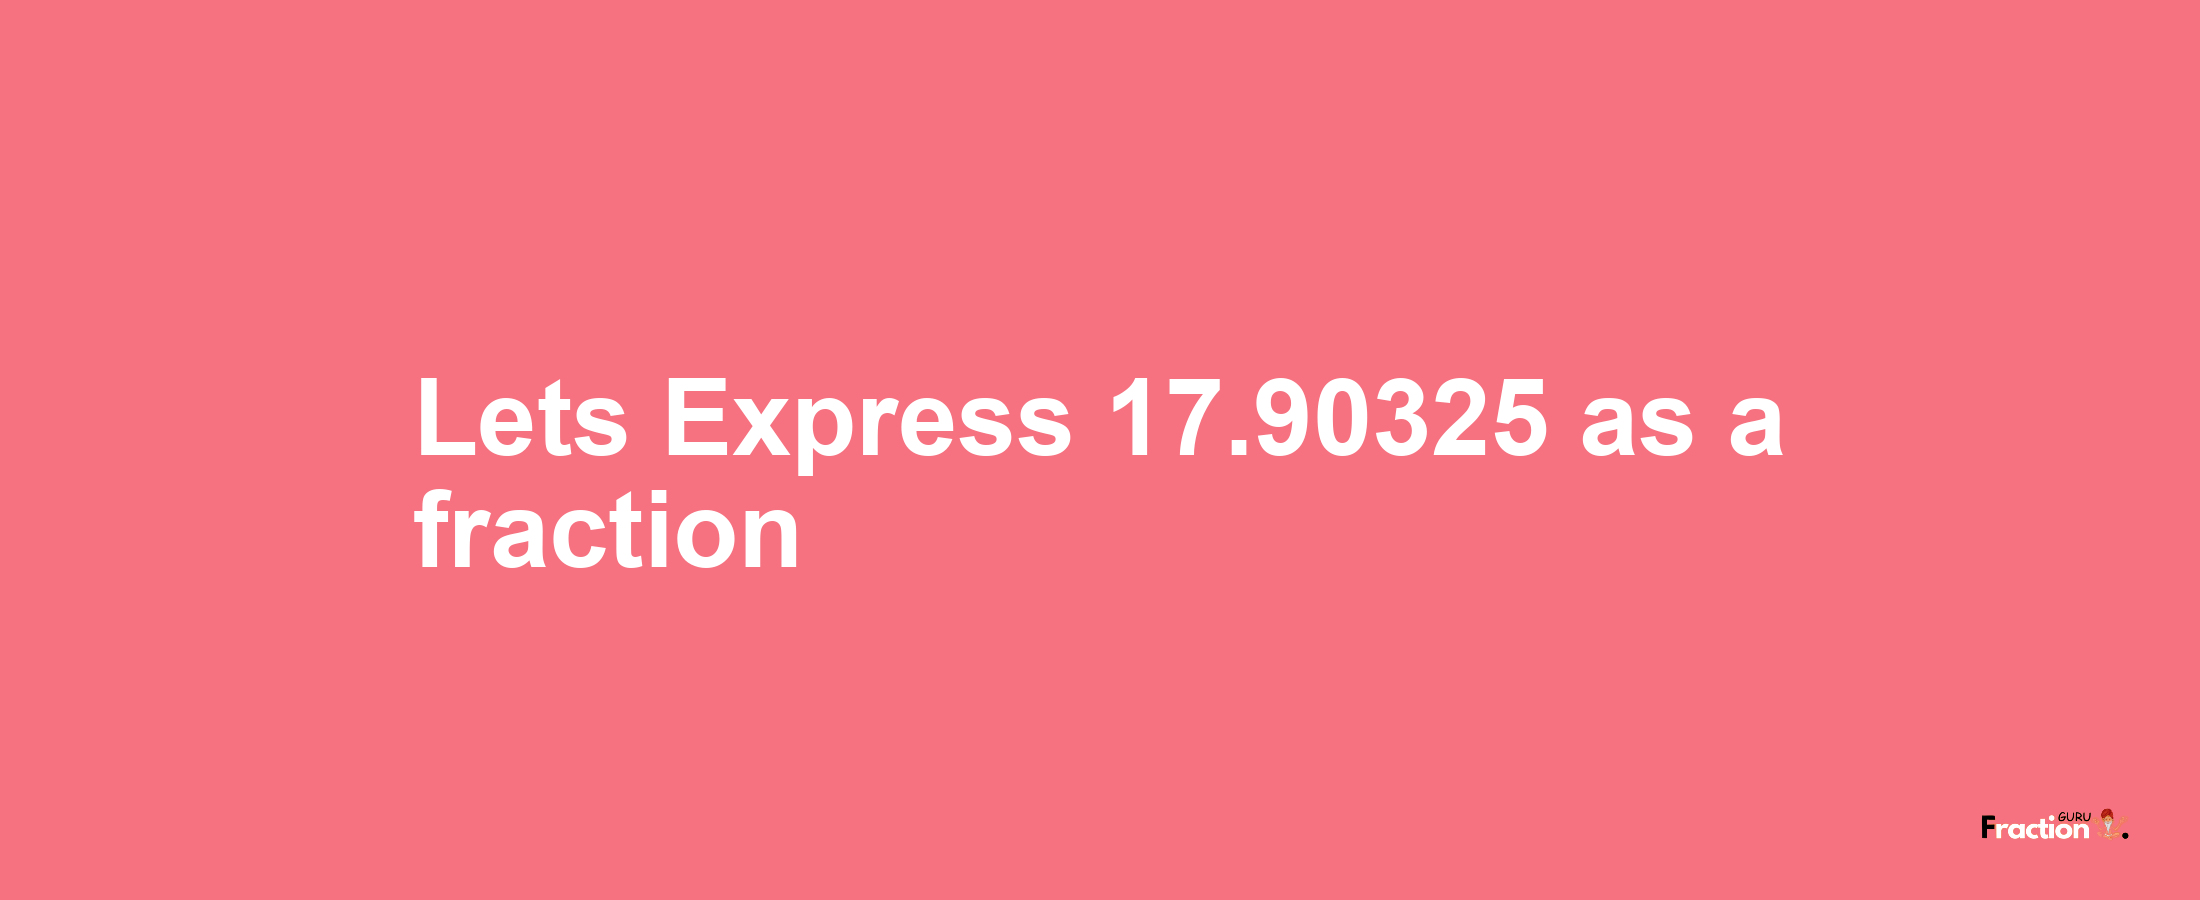 Lets Express 17.90325 as afraction